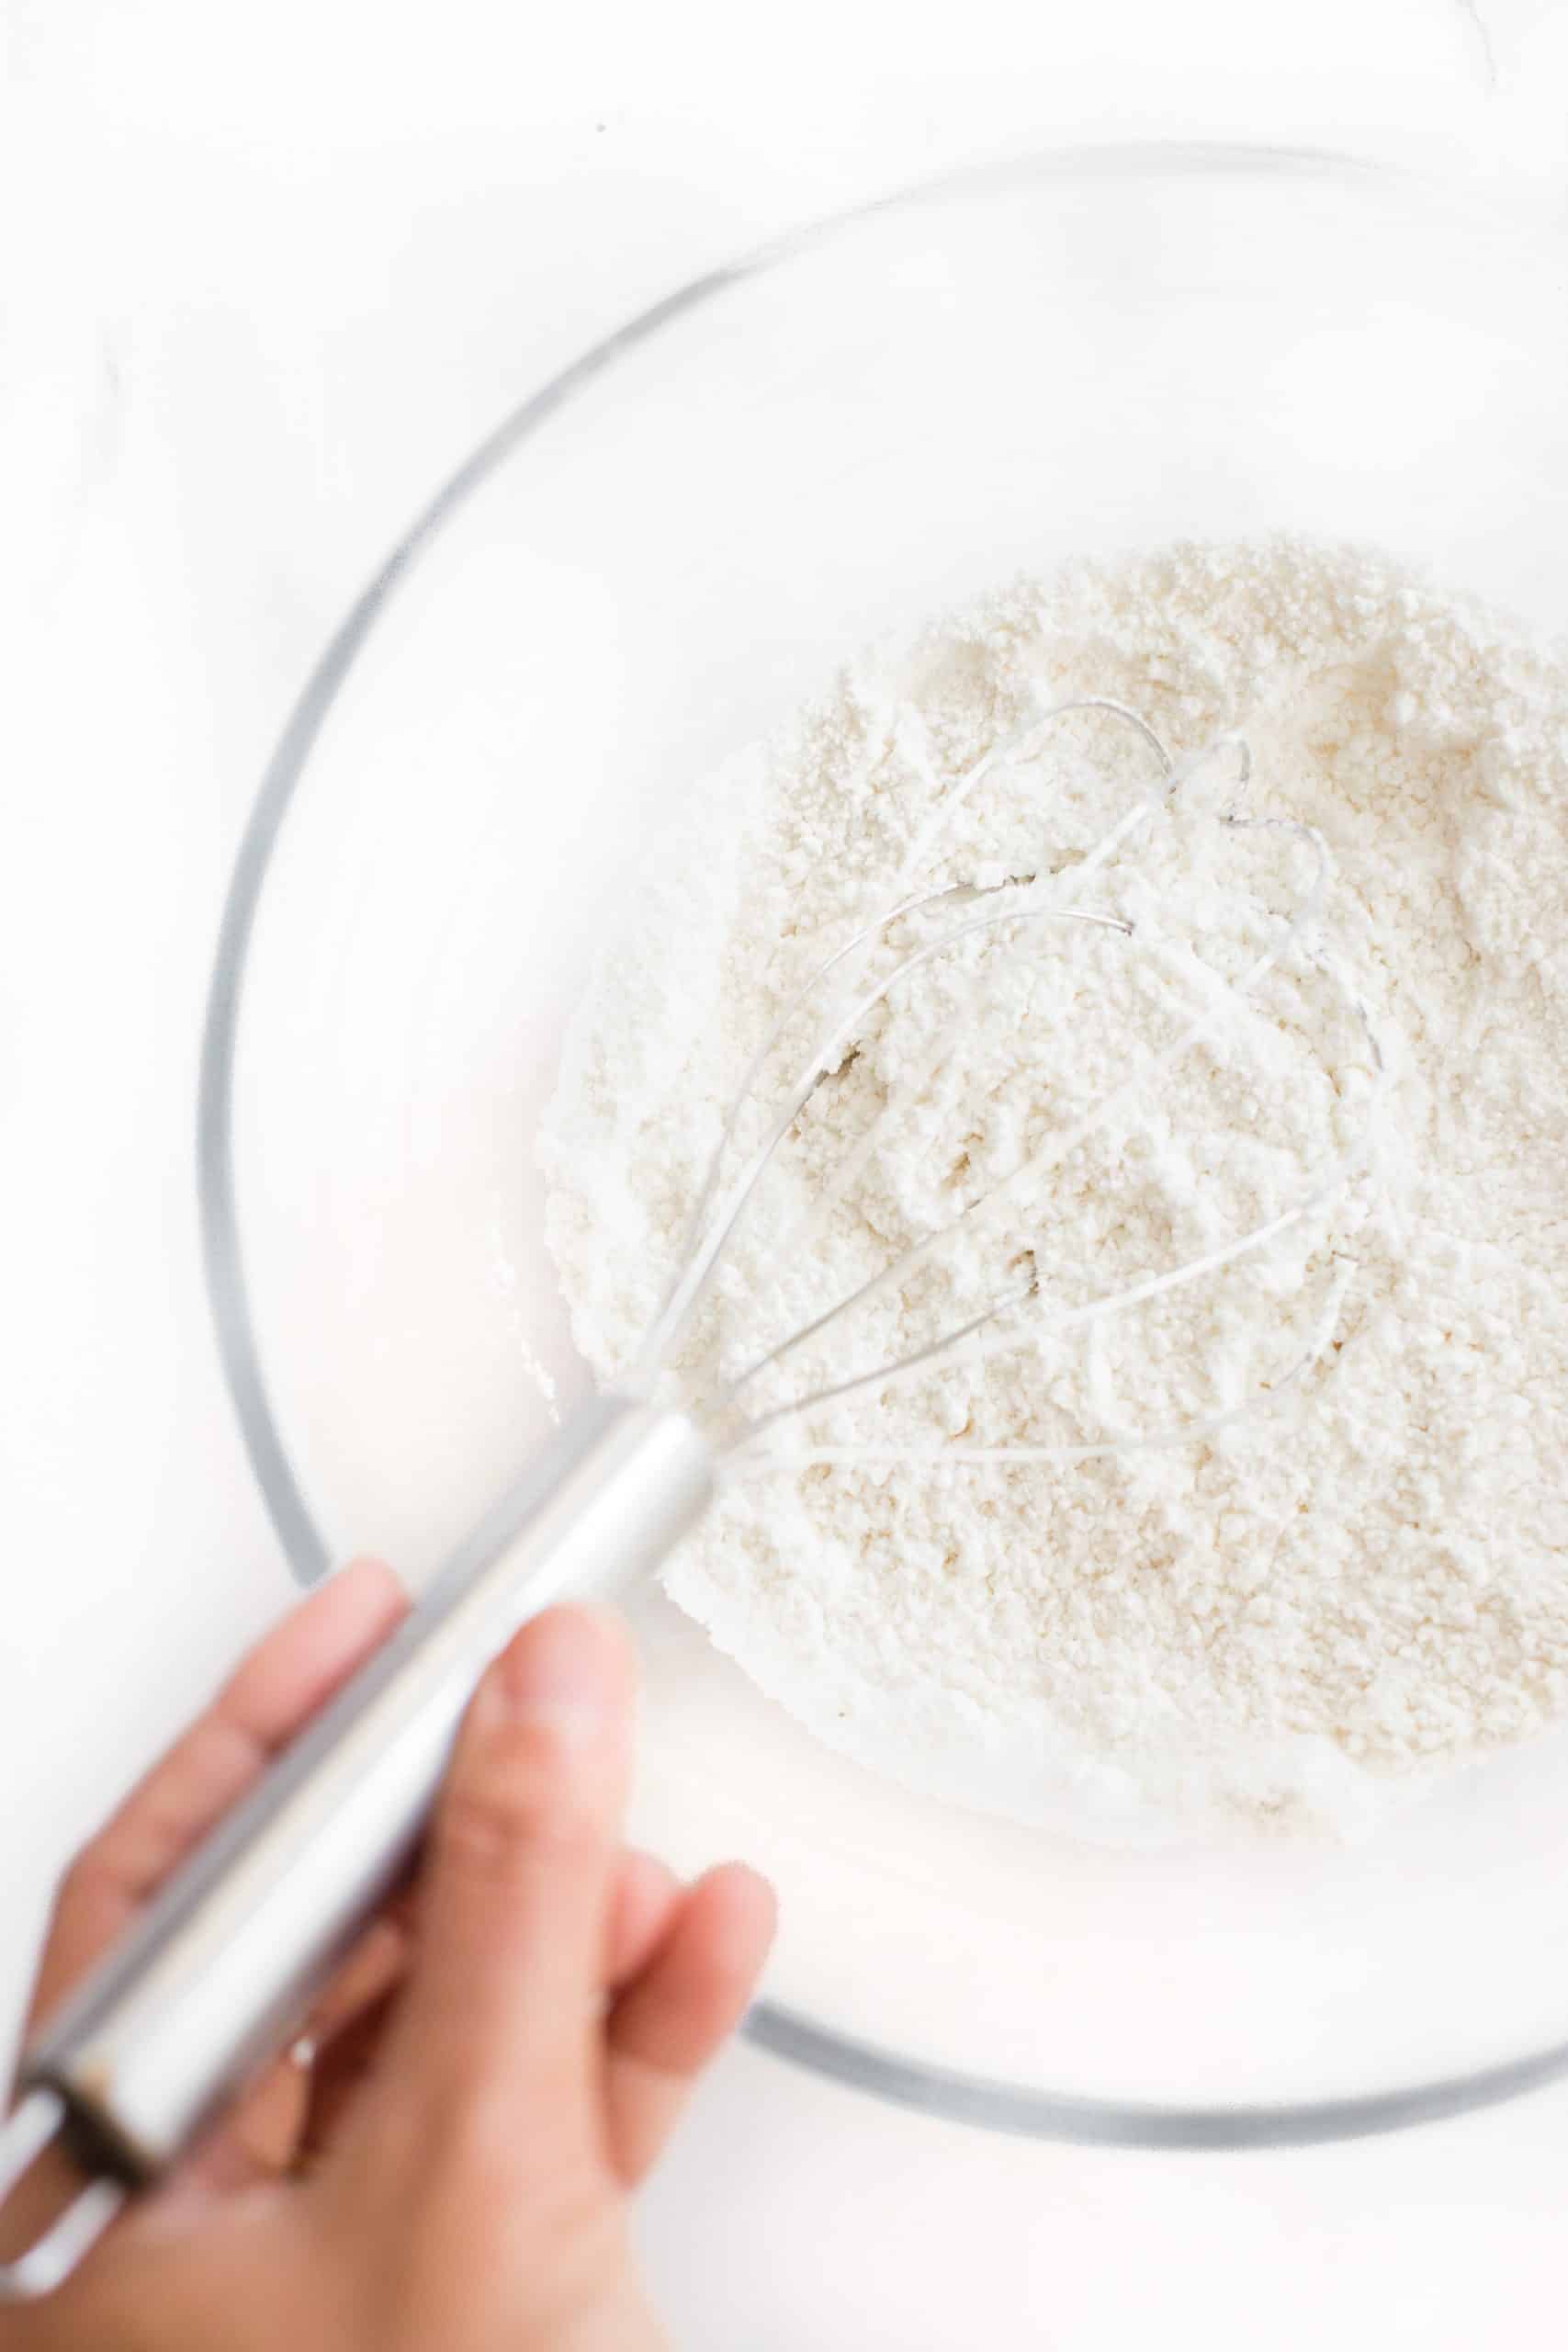 Whisking dry ingredients in a large glass bowl.